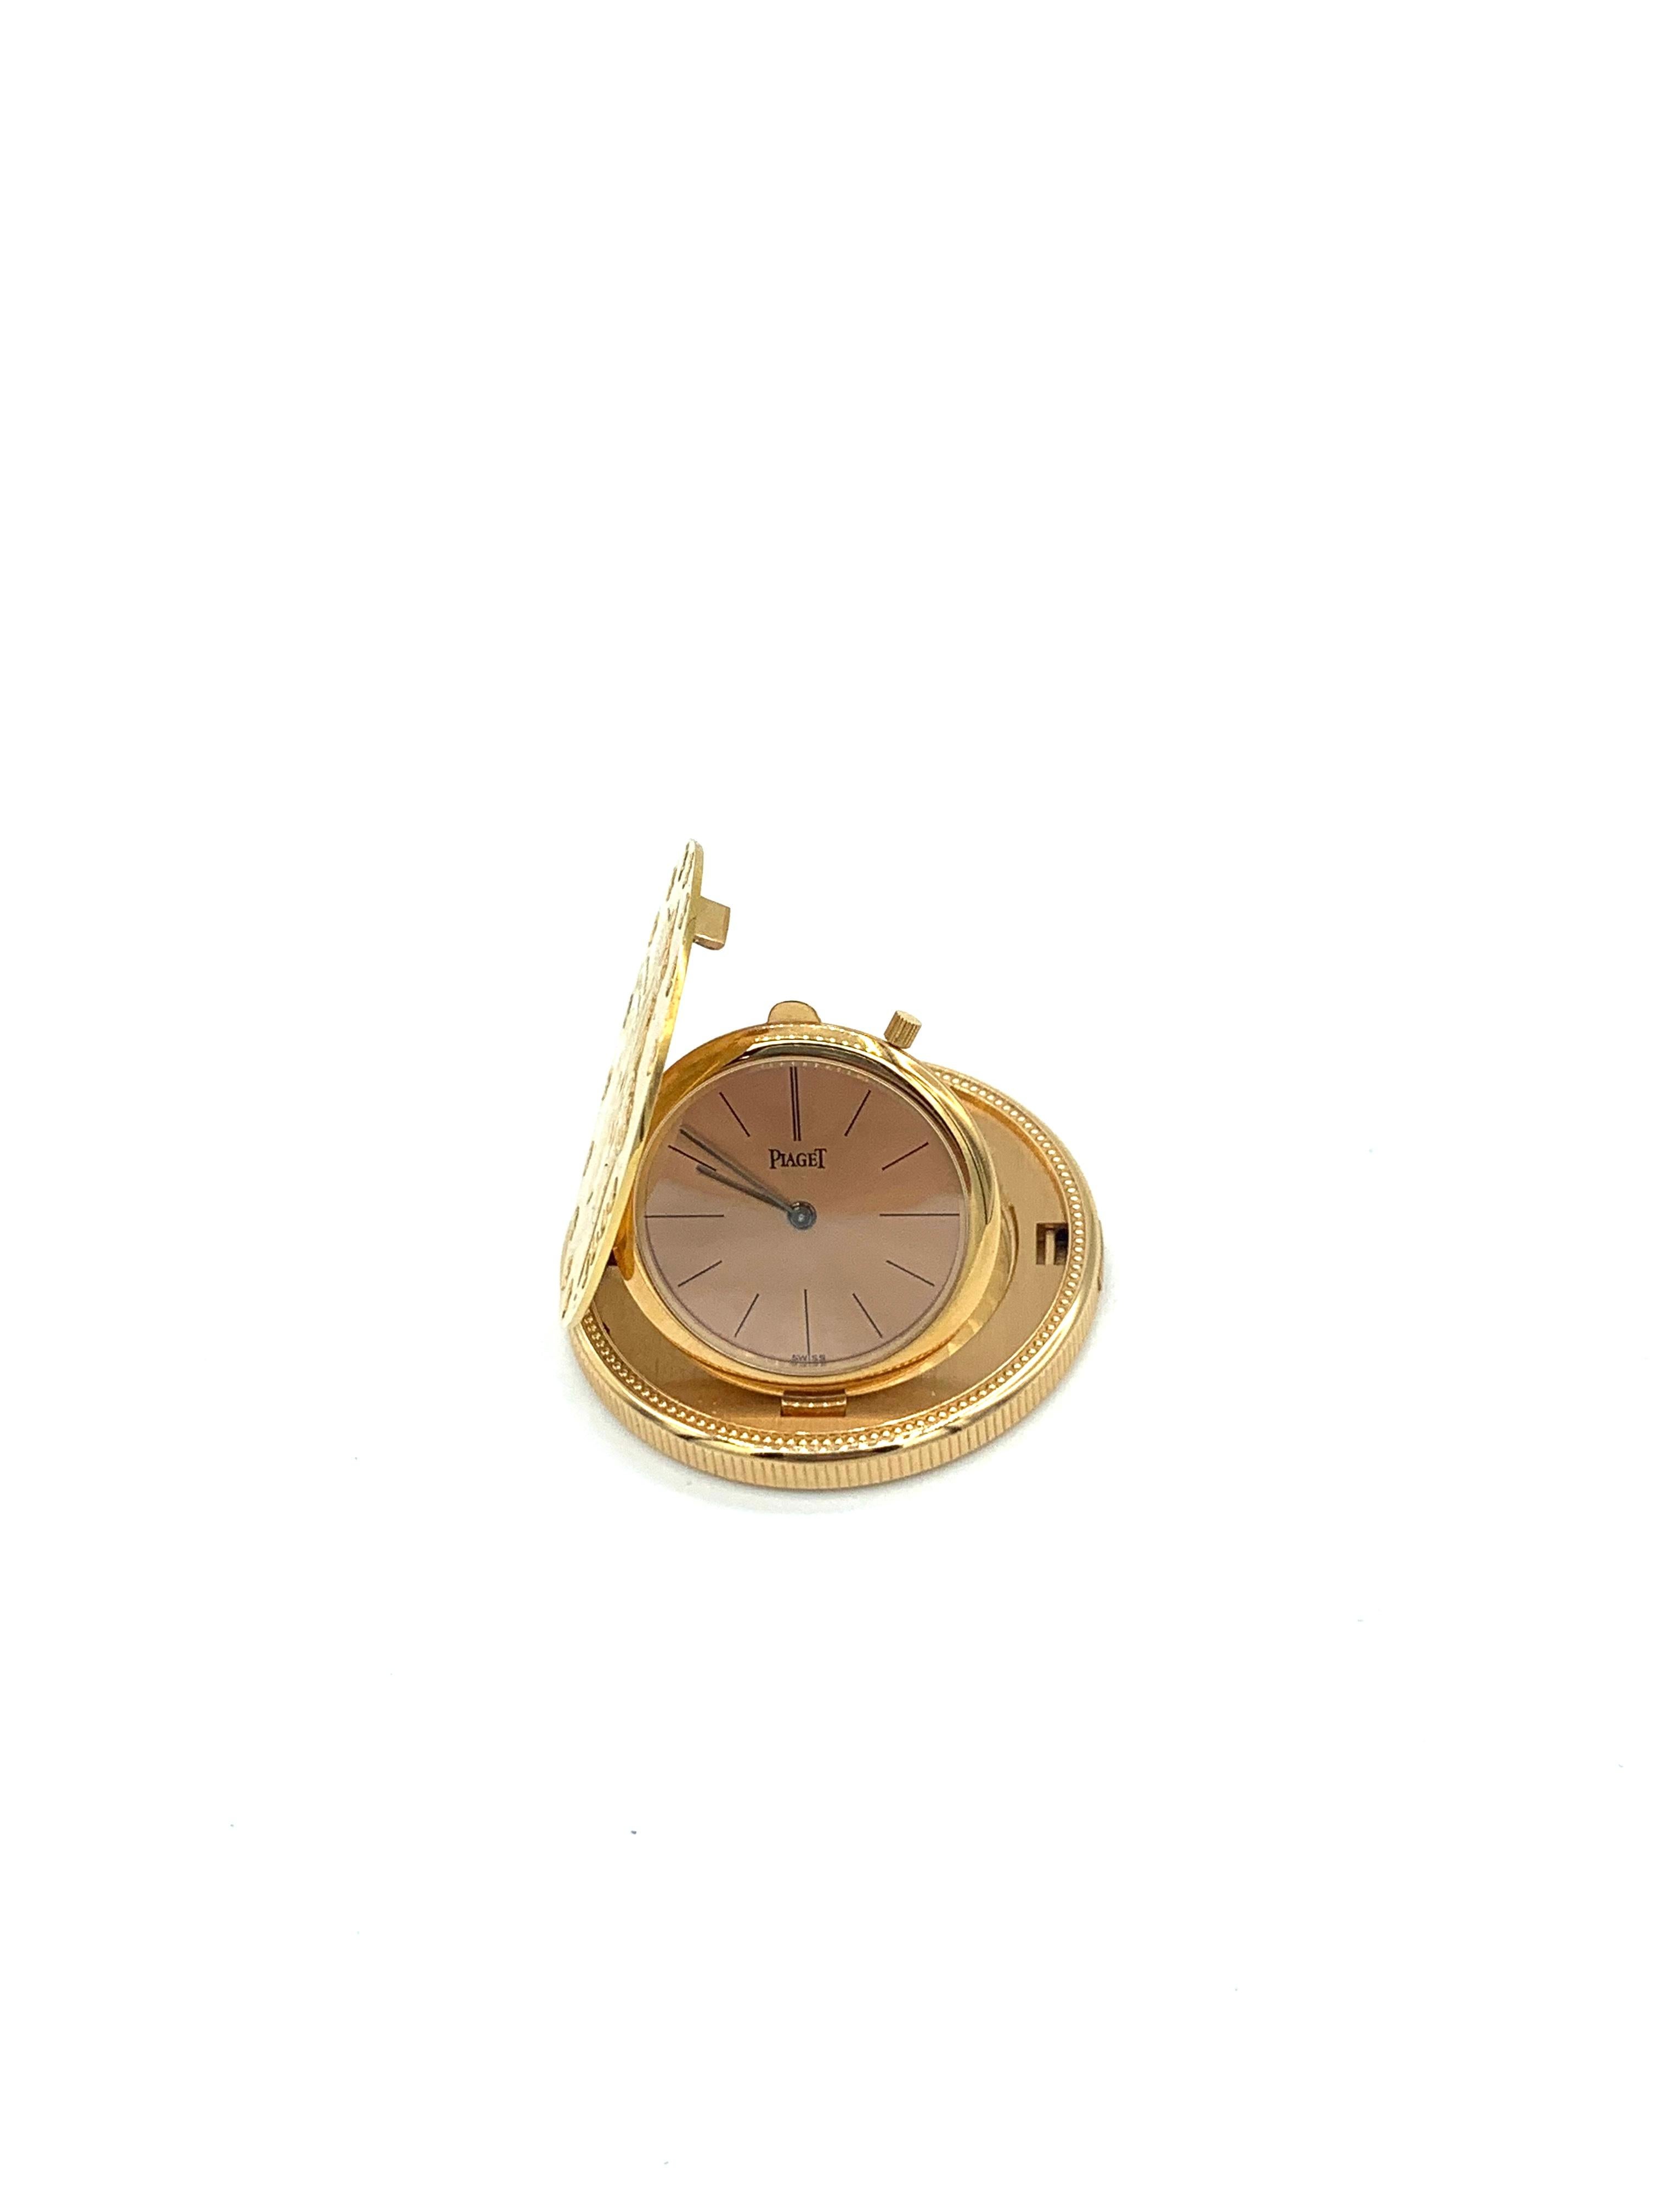 Piaget Pocket Watch. 18K Yellow Gold, 66 grams. Circa 1960. 1904 US  $20 gold piece cut in half, with a Piaget Swiss movement.   1 1/4 inches in diameter. Back of watch marked Piaget Swiss 18K 0.750, with 2 hallmarks. 2 additional hallmarks on